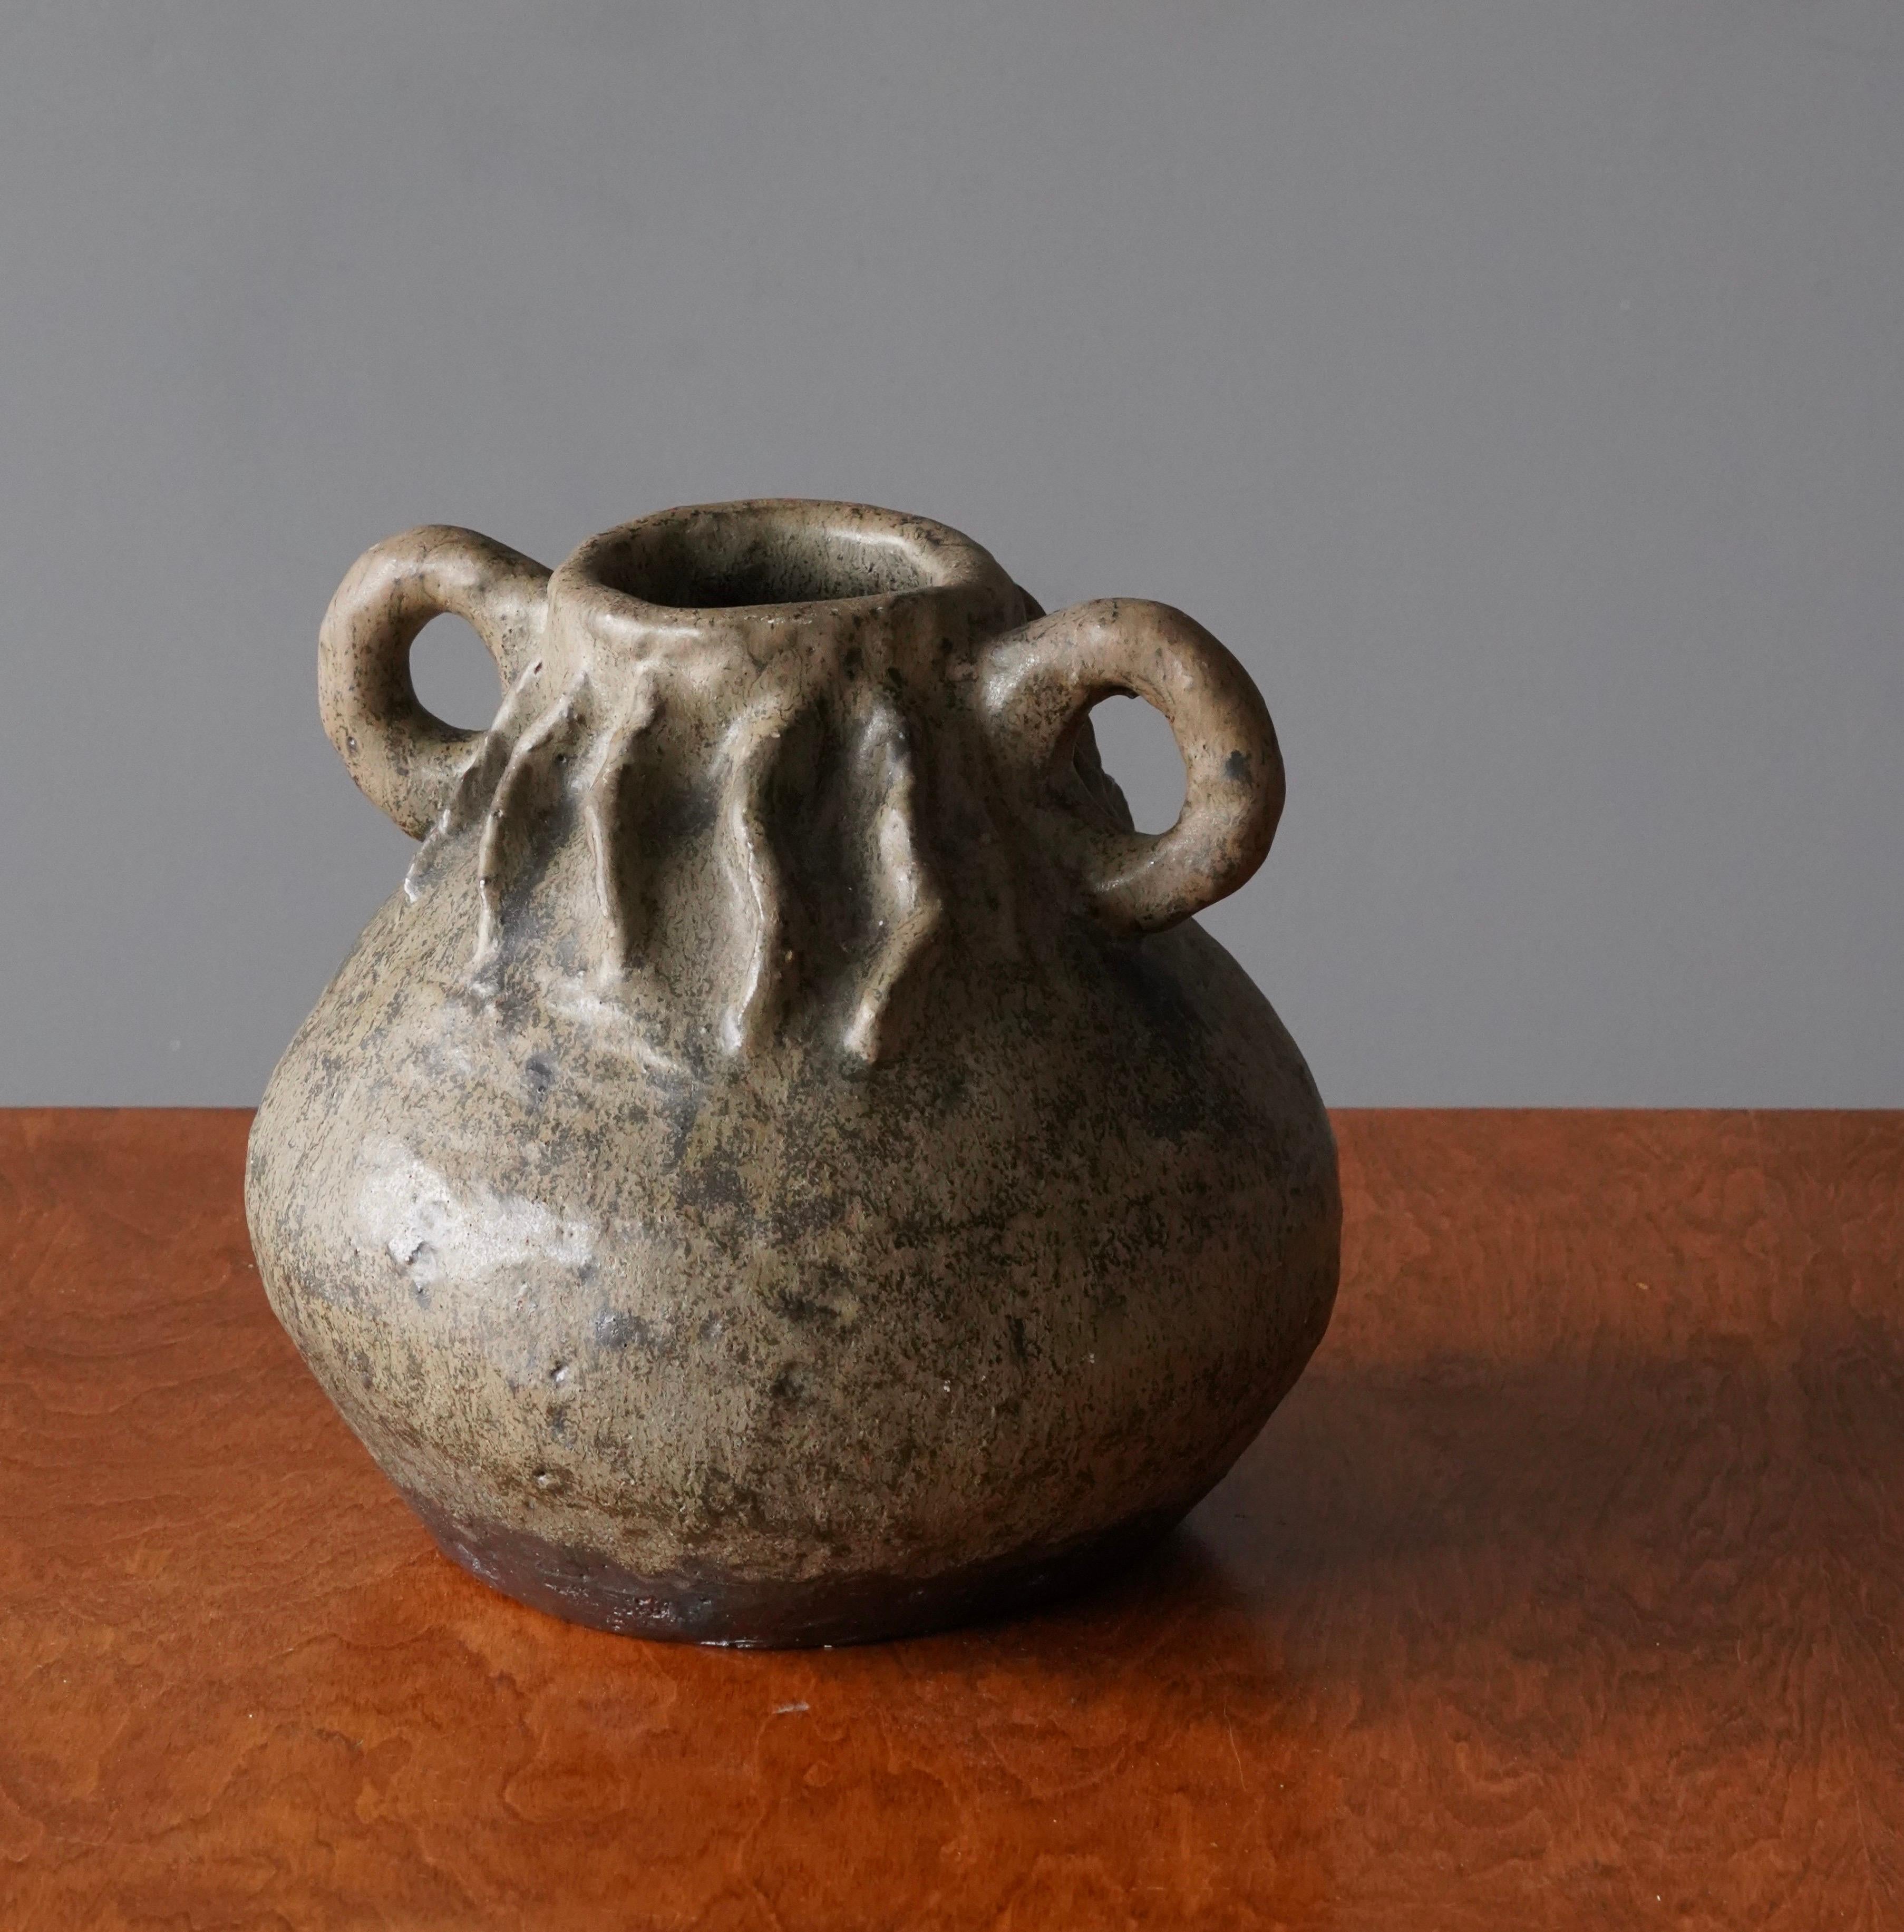 A vase by Klase Höganäs. In brown-glazed stoneware. Signed. Features a highly artistic glaze and ornamentation.

